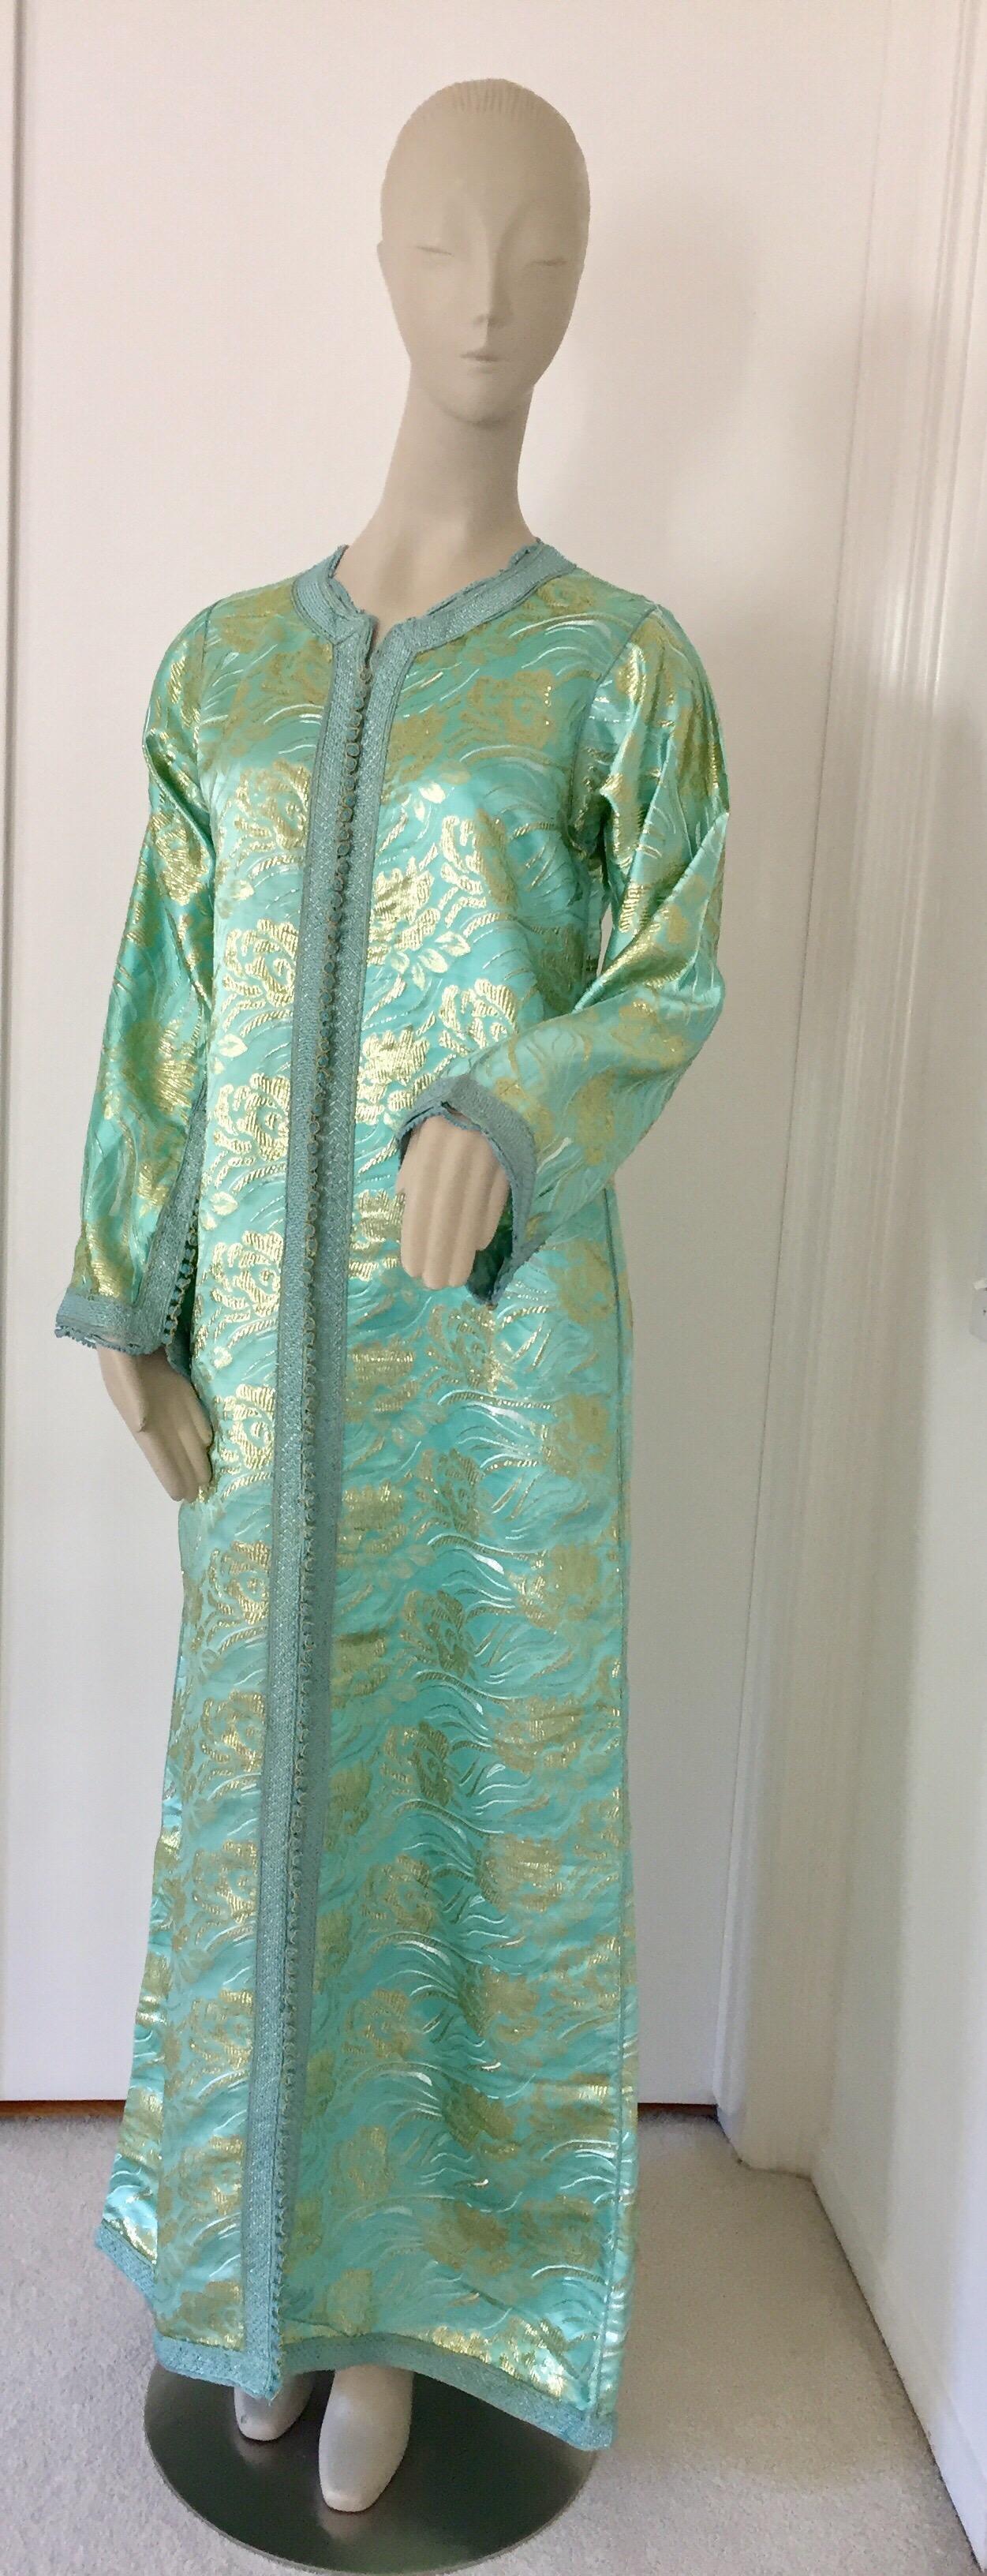 Gray Moroccan Kaftan in Turquoise and Gold Floral Brocade Metallic Lame For Sale